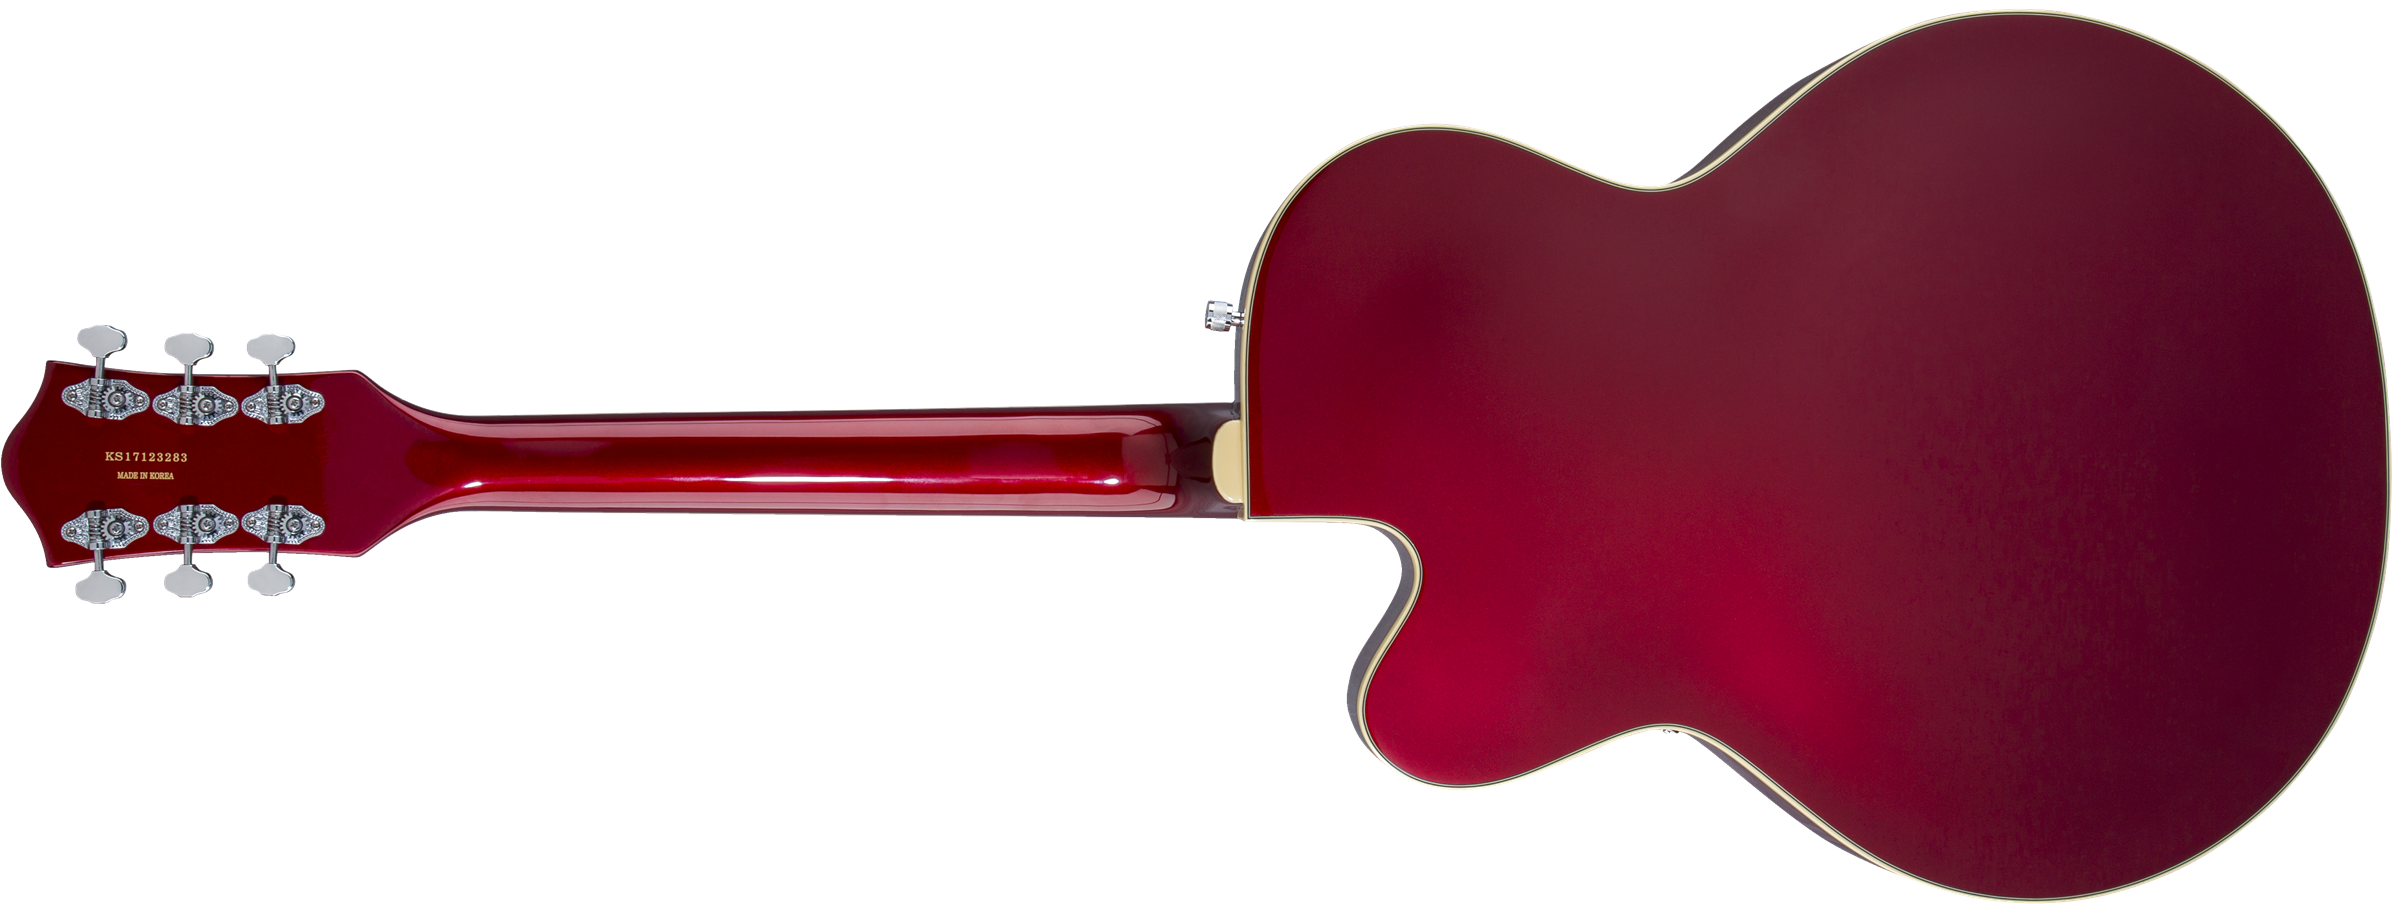 Gretsch G5420t Electromatic Hollow Body 2018 - Candy Apple Red - Guitare Électrique 1/2 Caisse - Variation 1